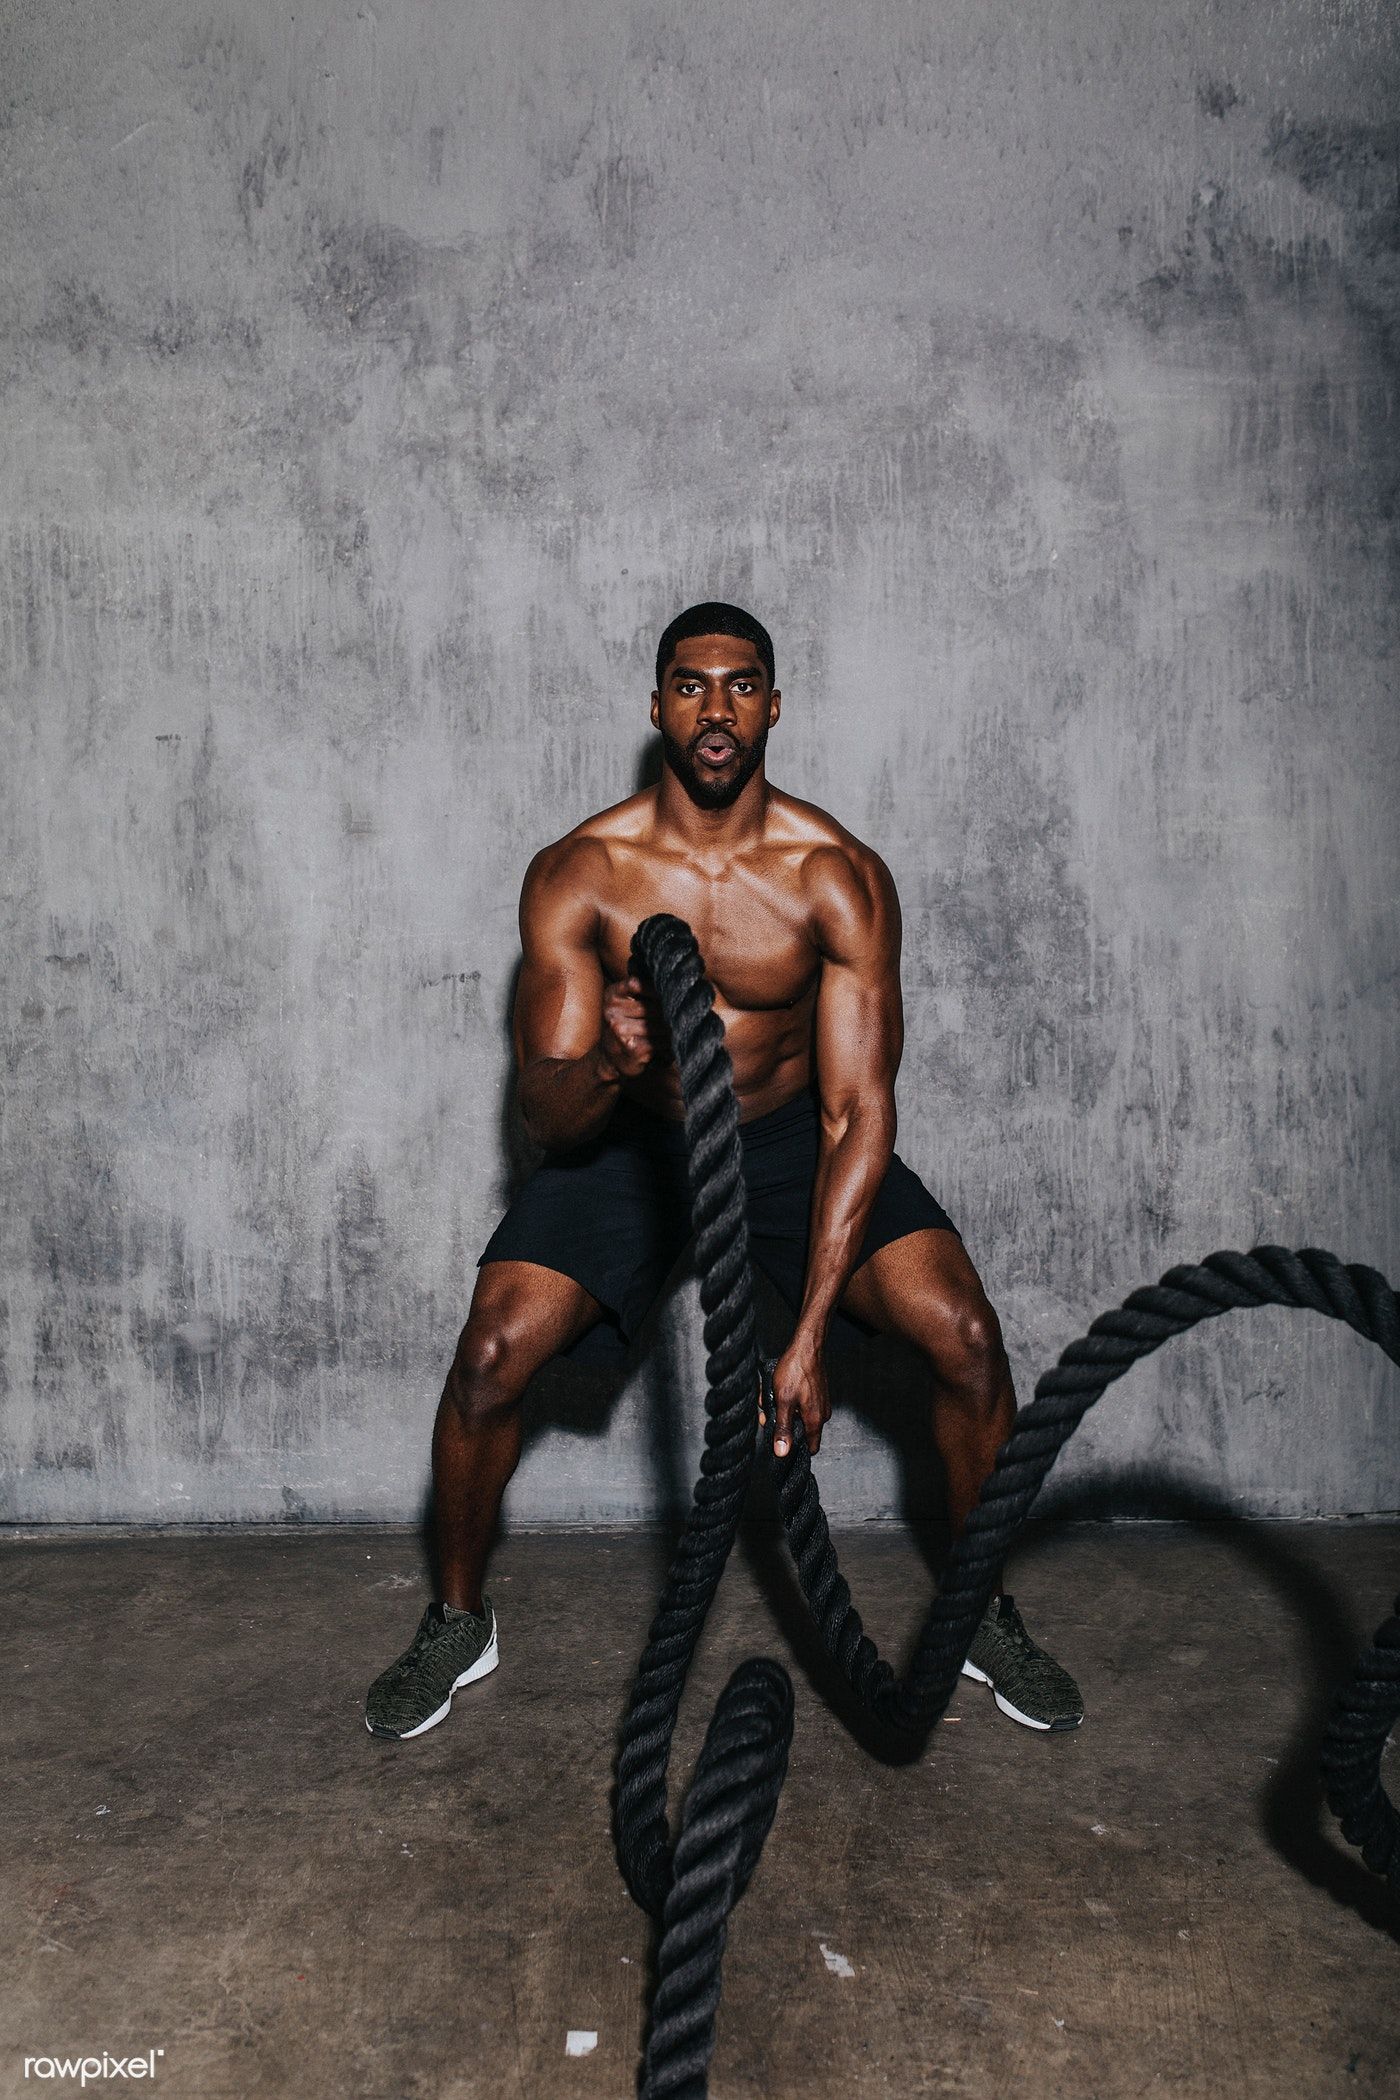 Download premium image of Muscular man doing a battle rope in a